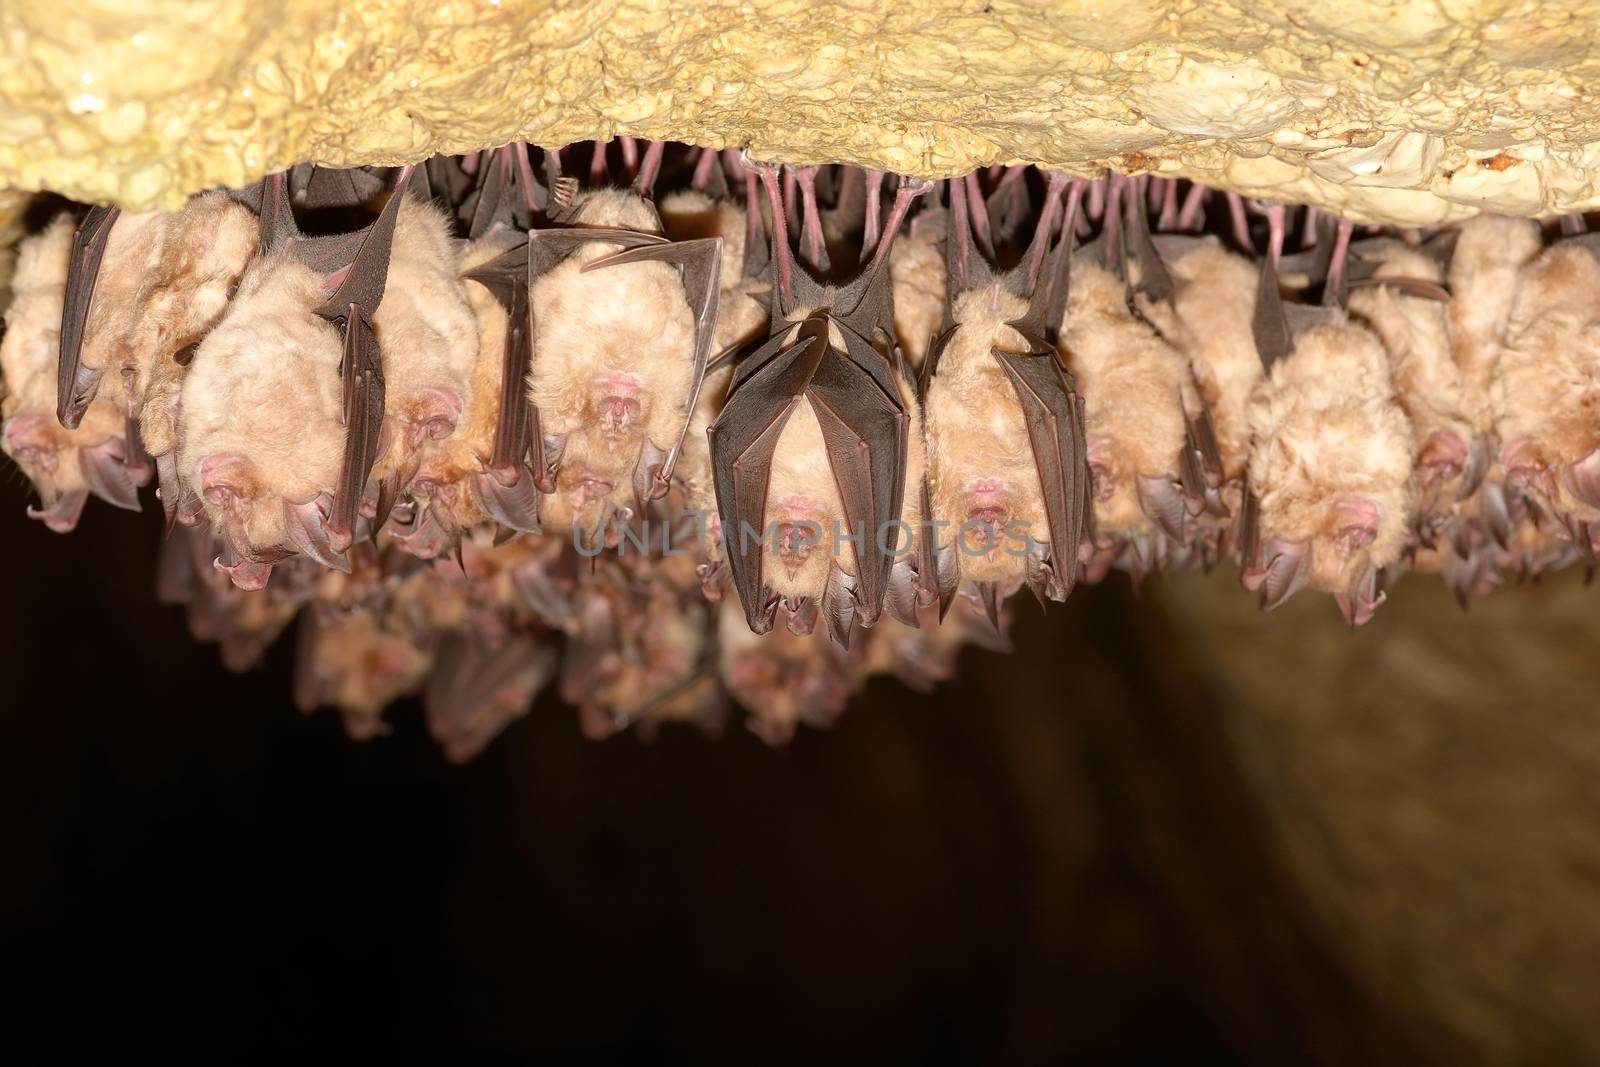 Greater horseshoe bat by comet